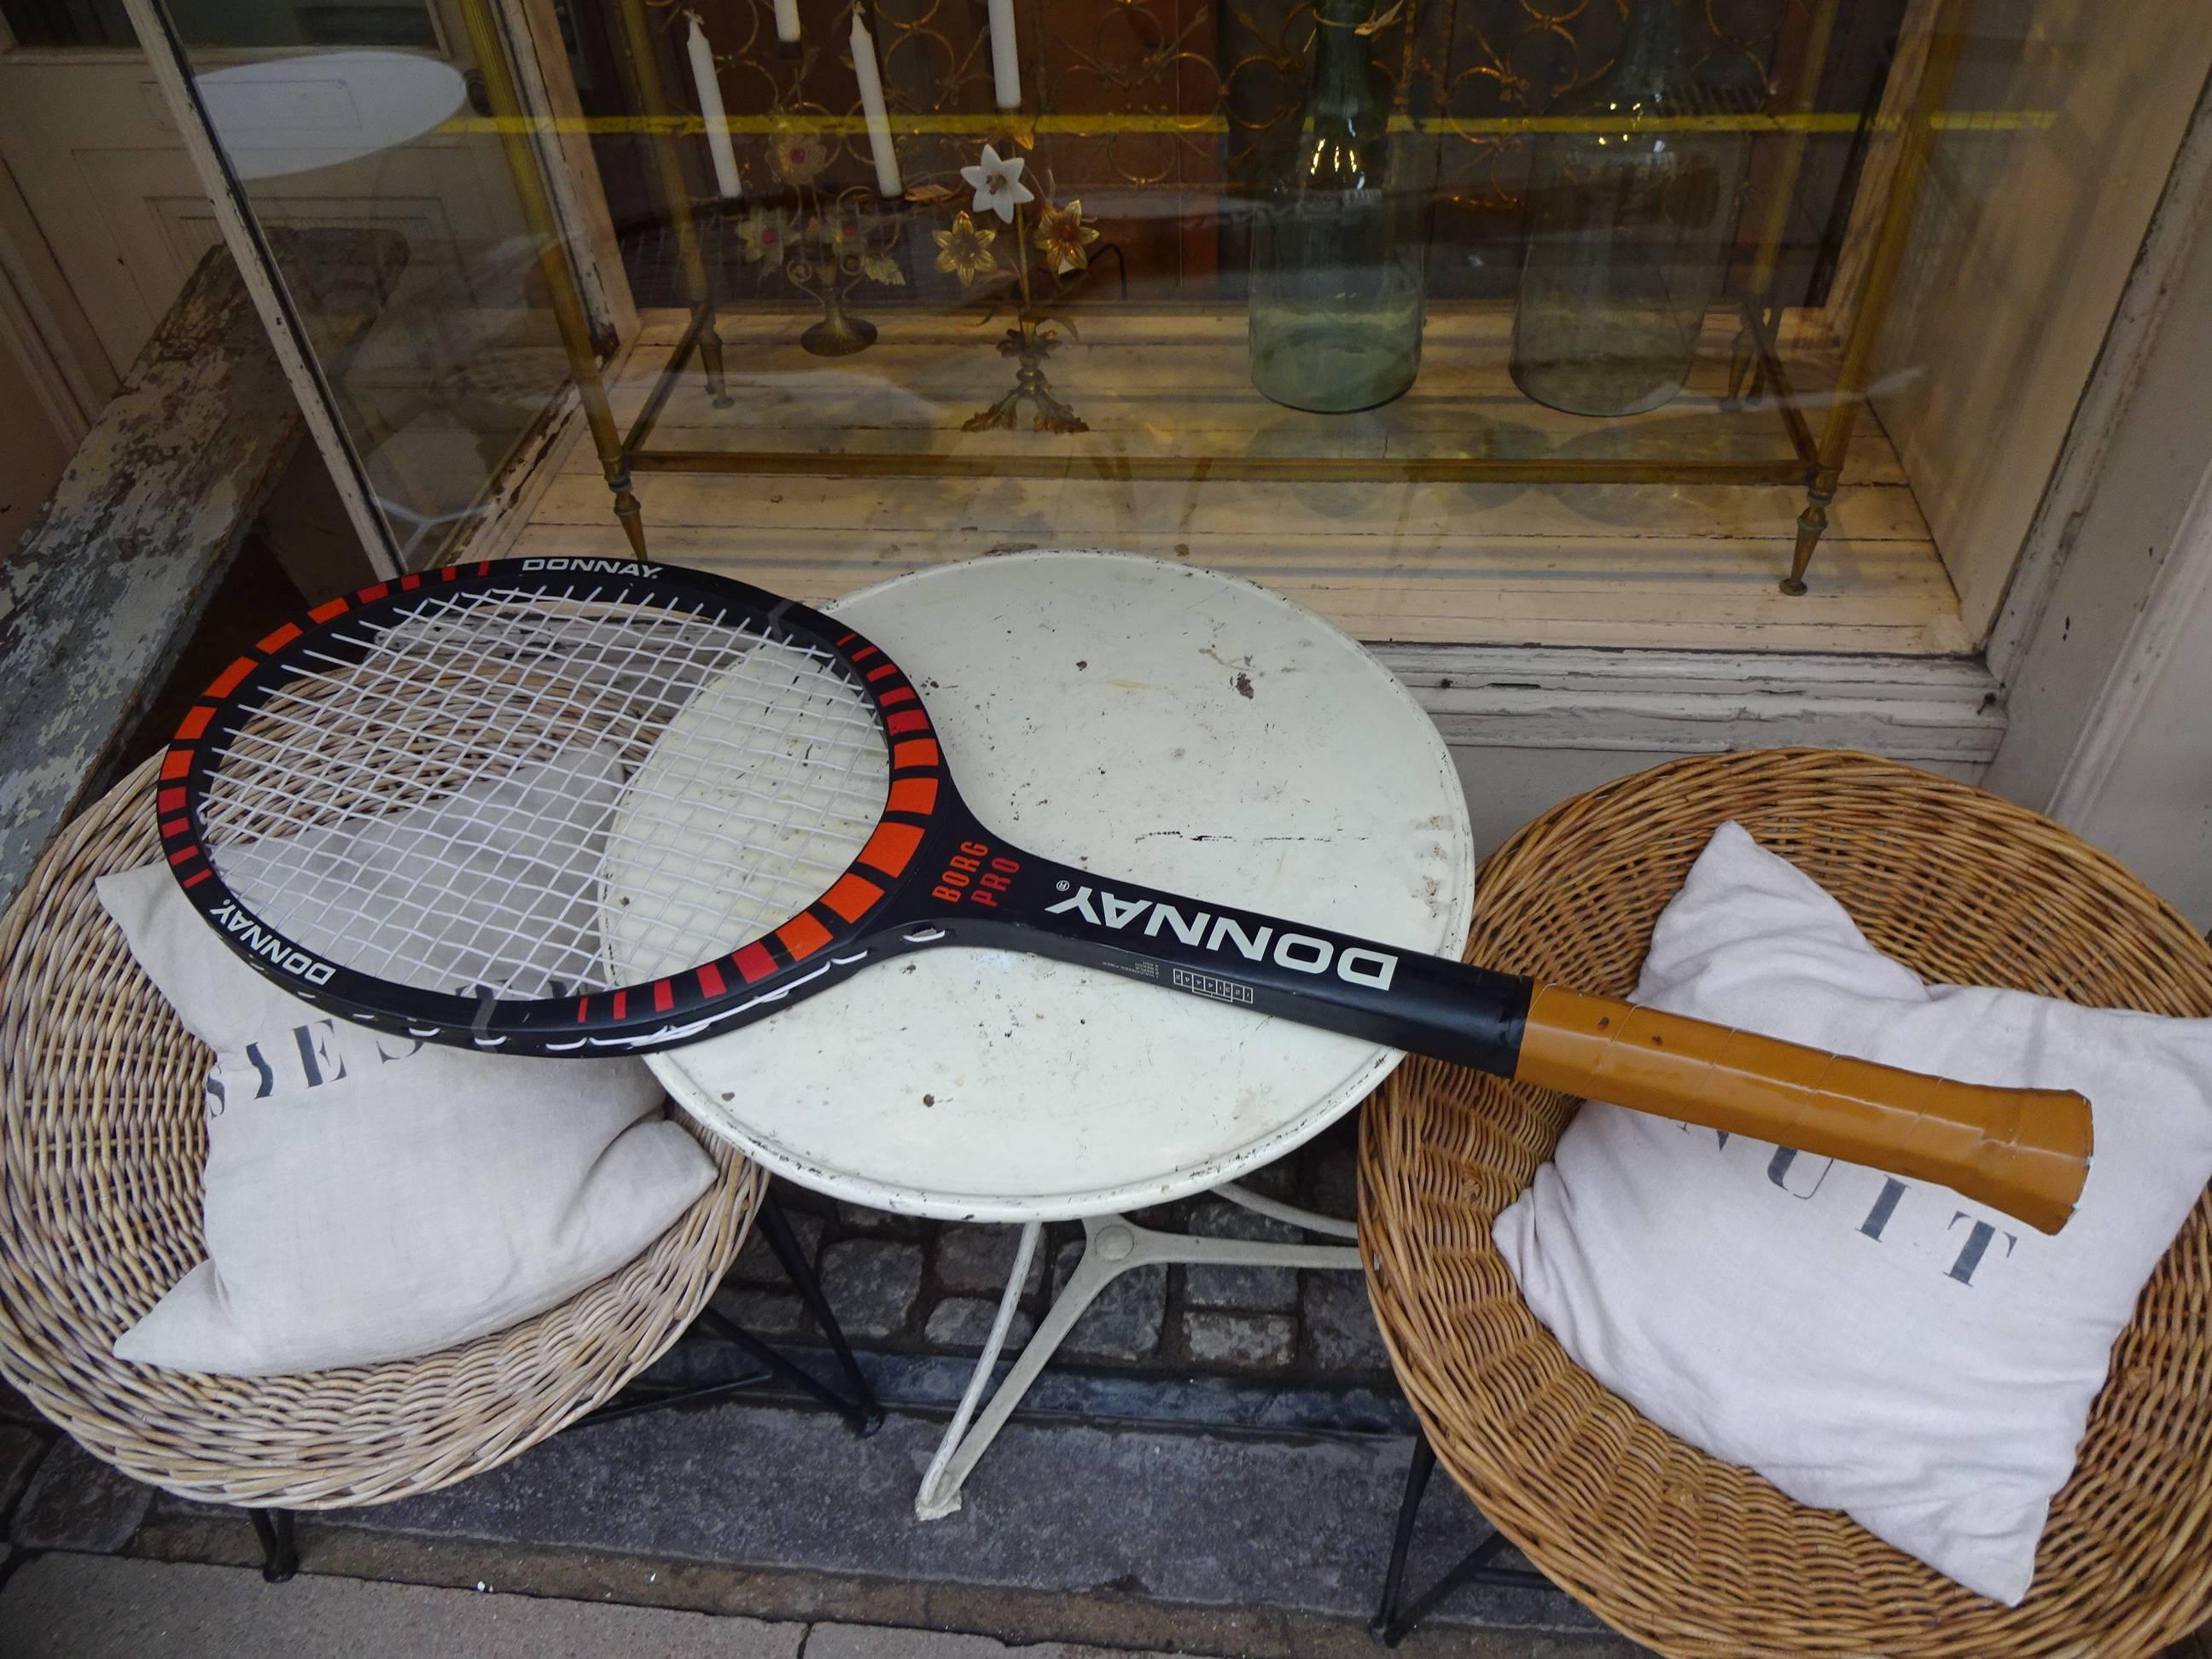 donnay tennis racquets